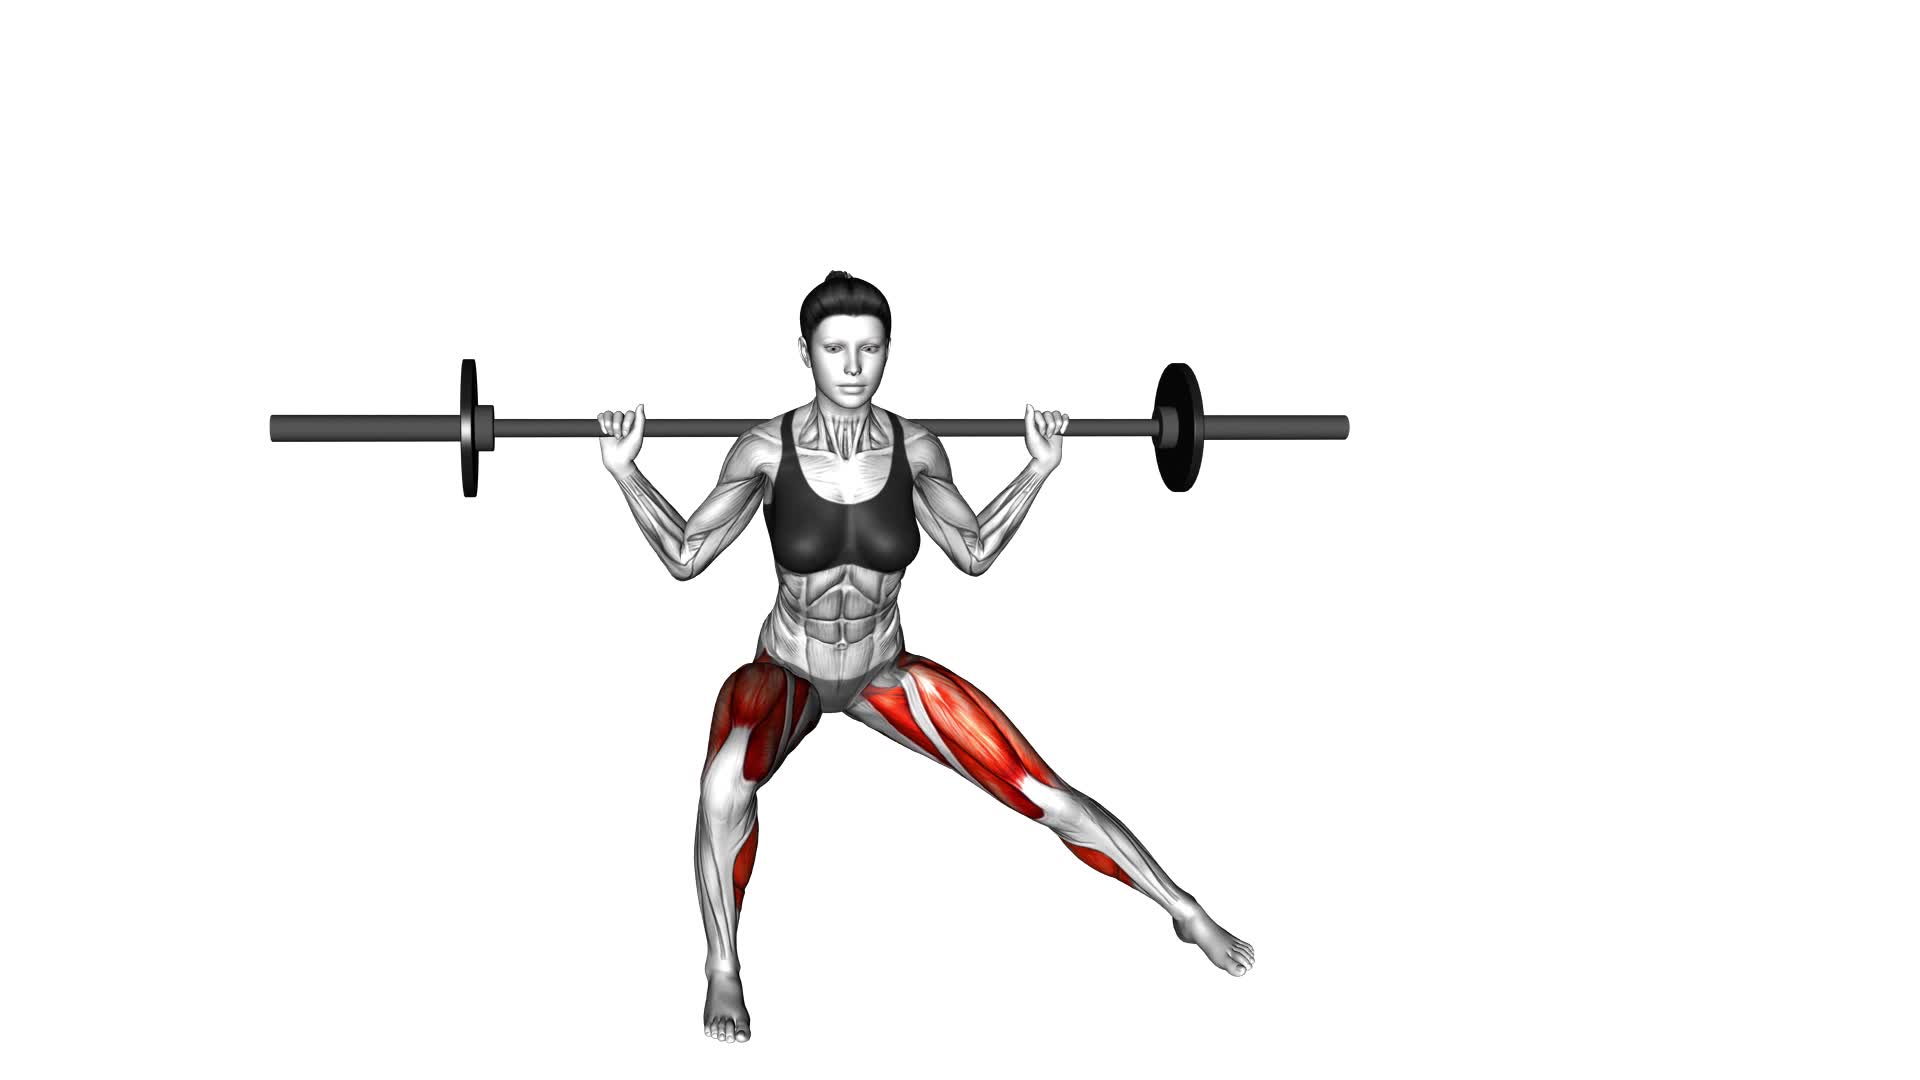 Barbell Lateral Lunge (female) - Video Exercise Guide & Tips